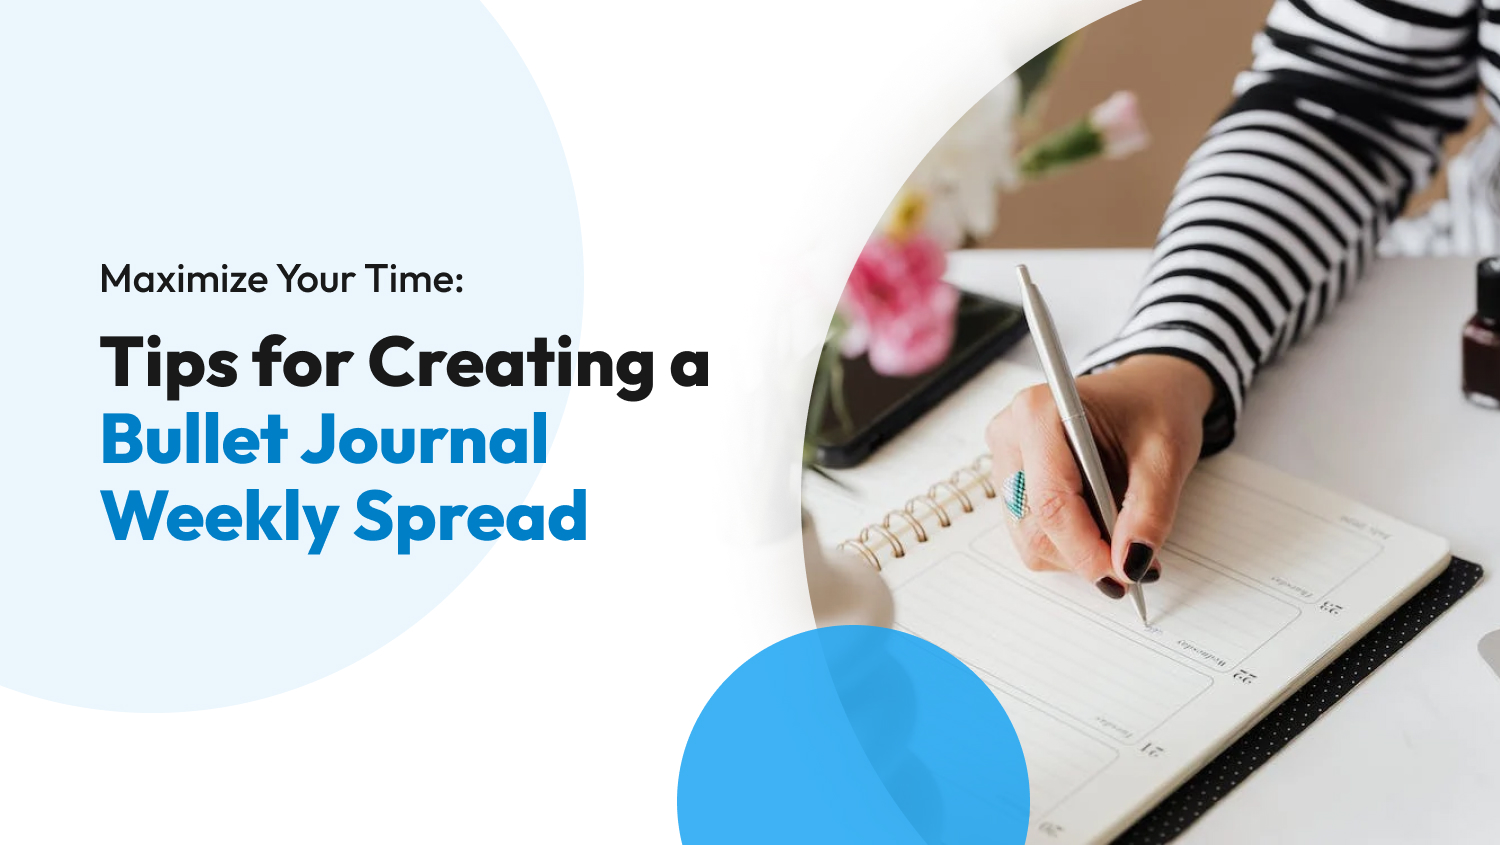 Tips for Creating a Bullet Journal Weekly Spread